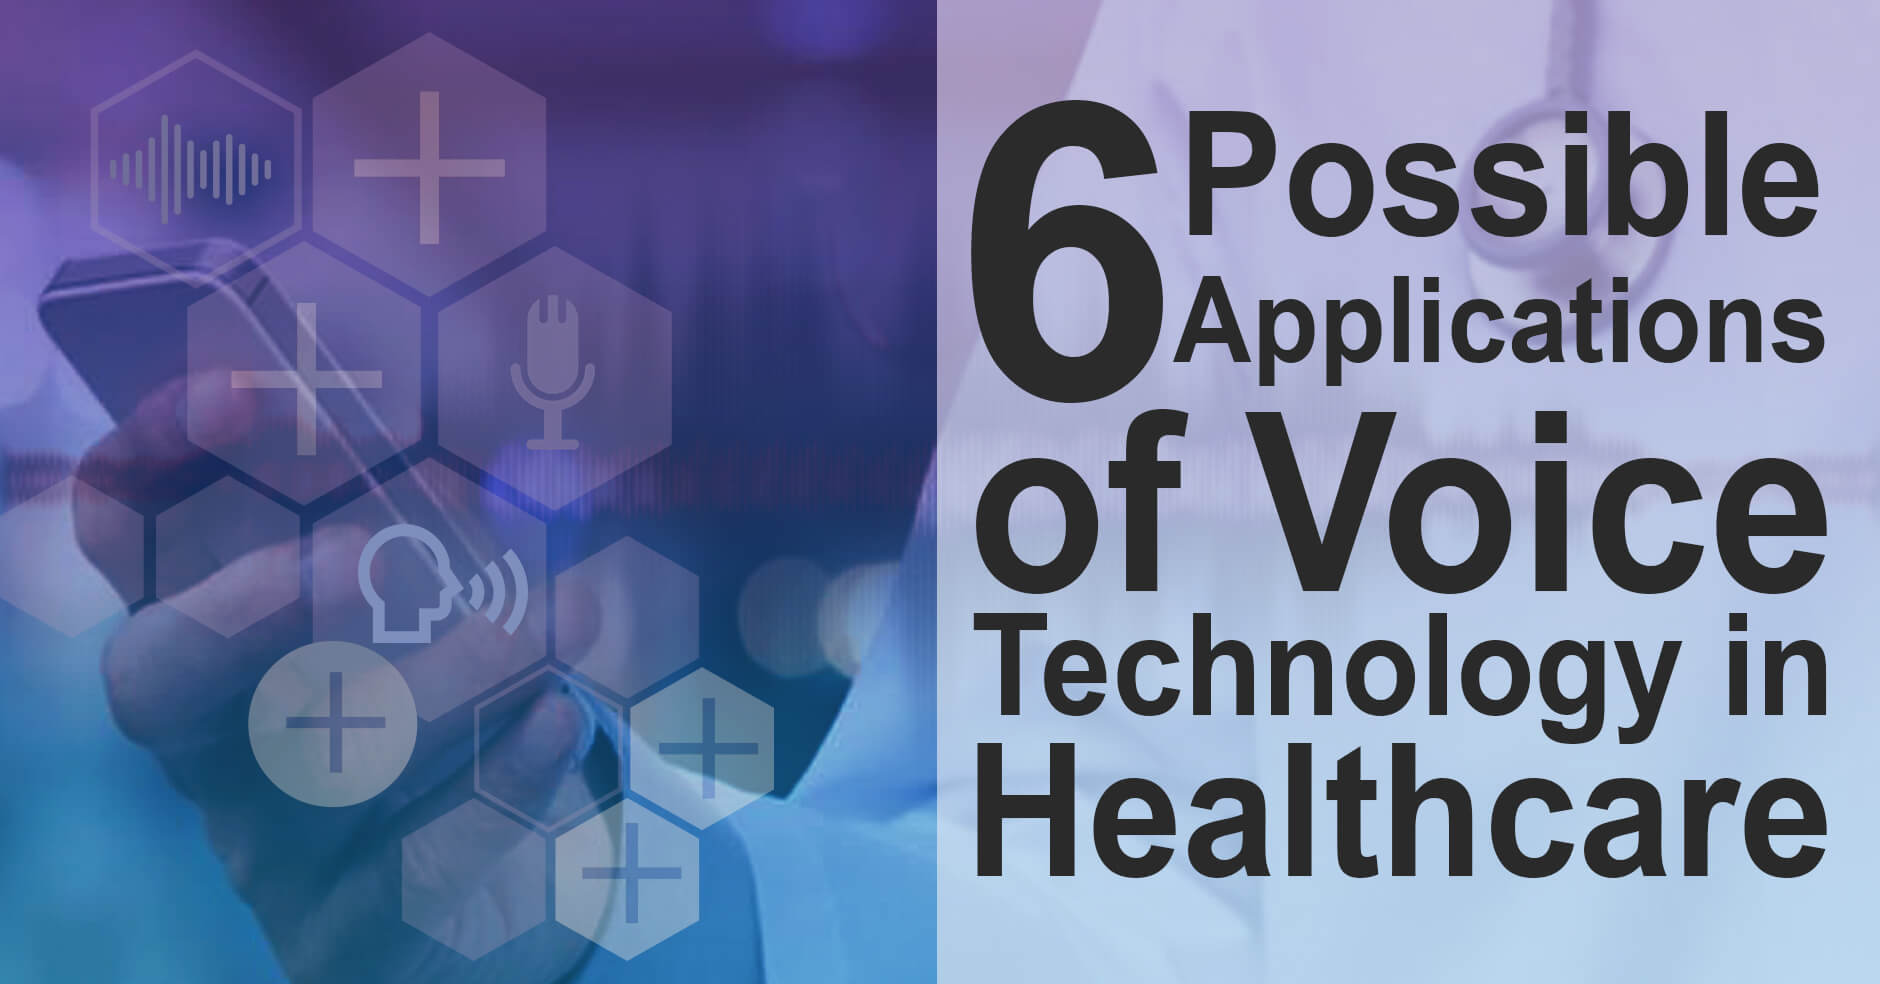 6 Possible Applications of Voice Technology in Healthcare